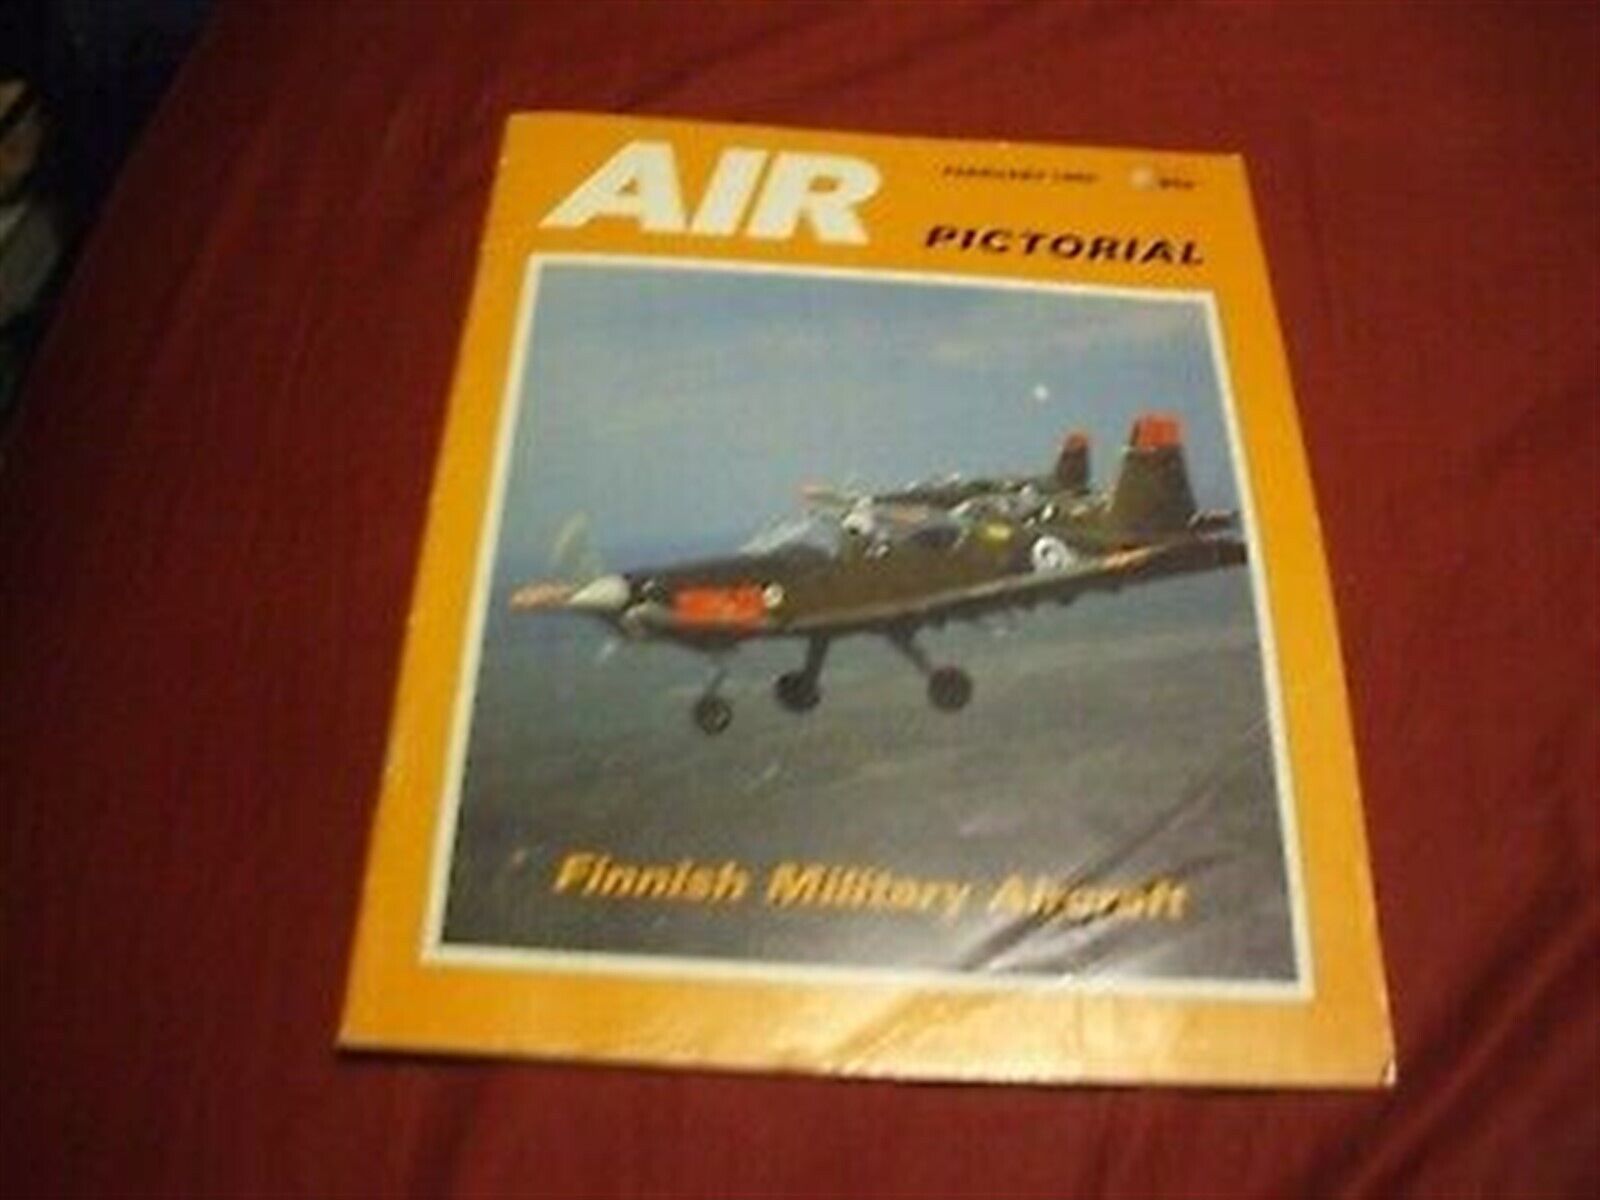 AIR PICTORIAL Magazine - February 1985